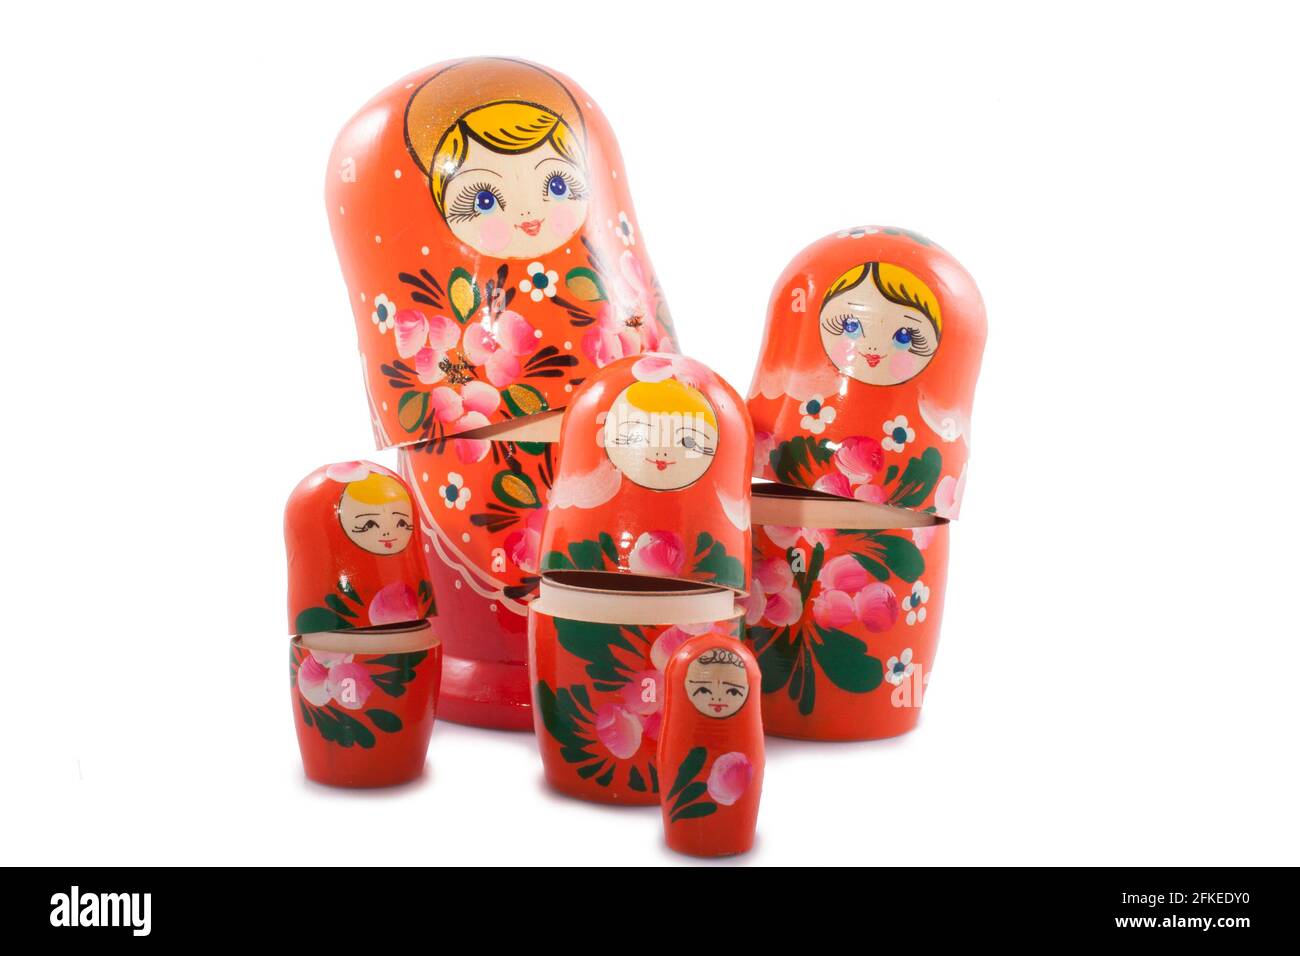 wooden souvenir dolls isolated on a white backgroud Stock Photo